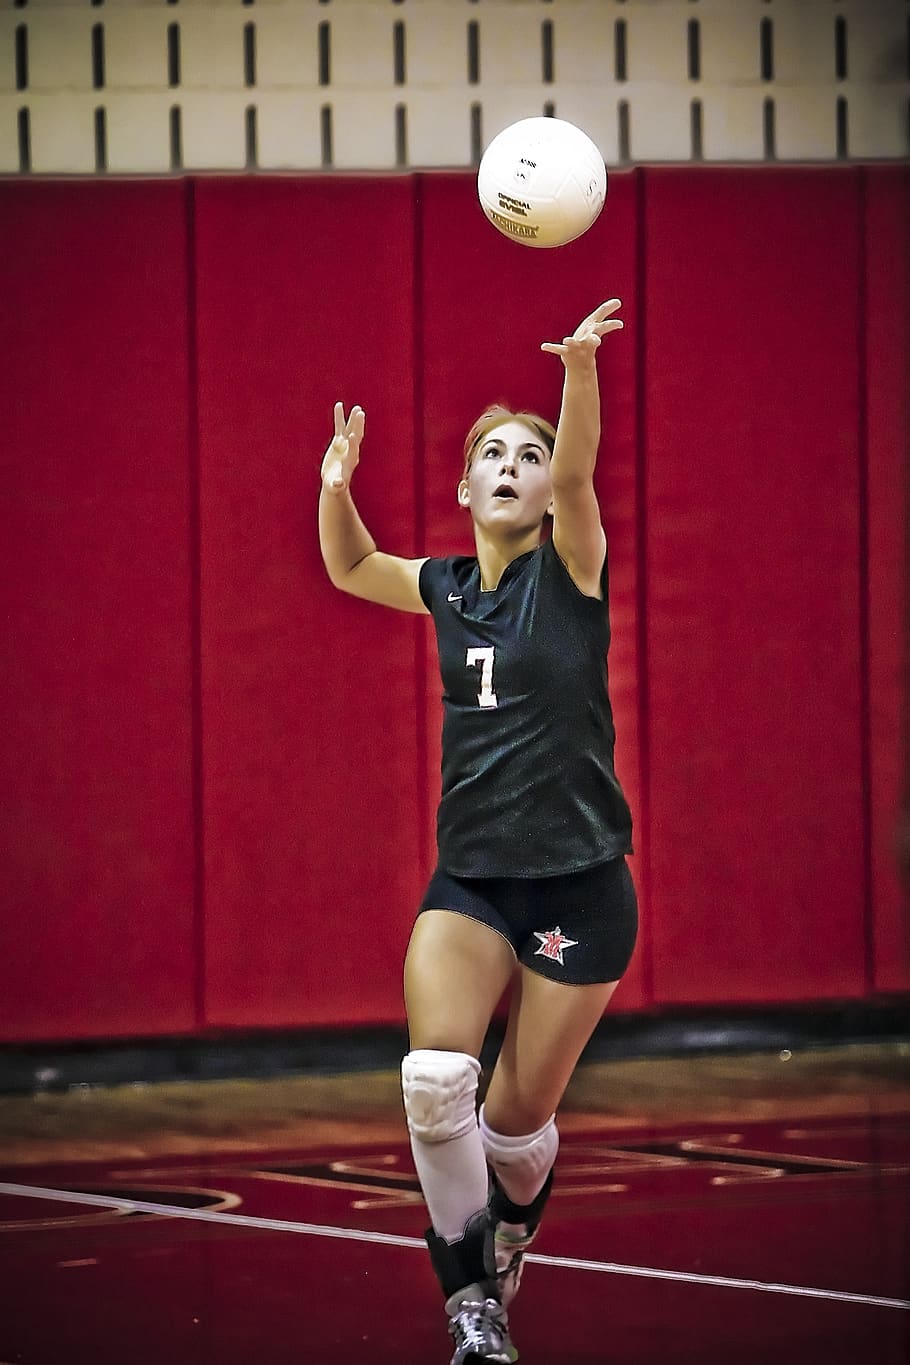 volleyball, serve, girl, ball, player, athlete, competition, athletic, female, activity